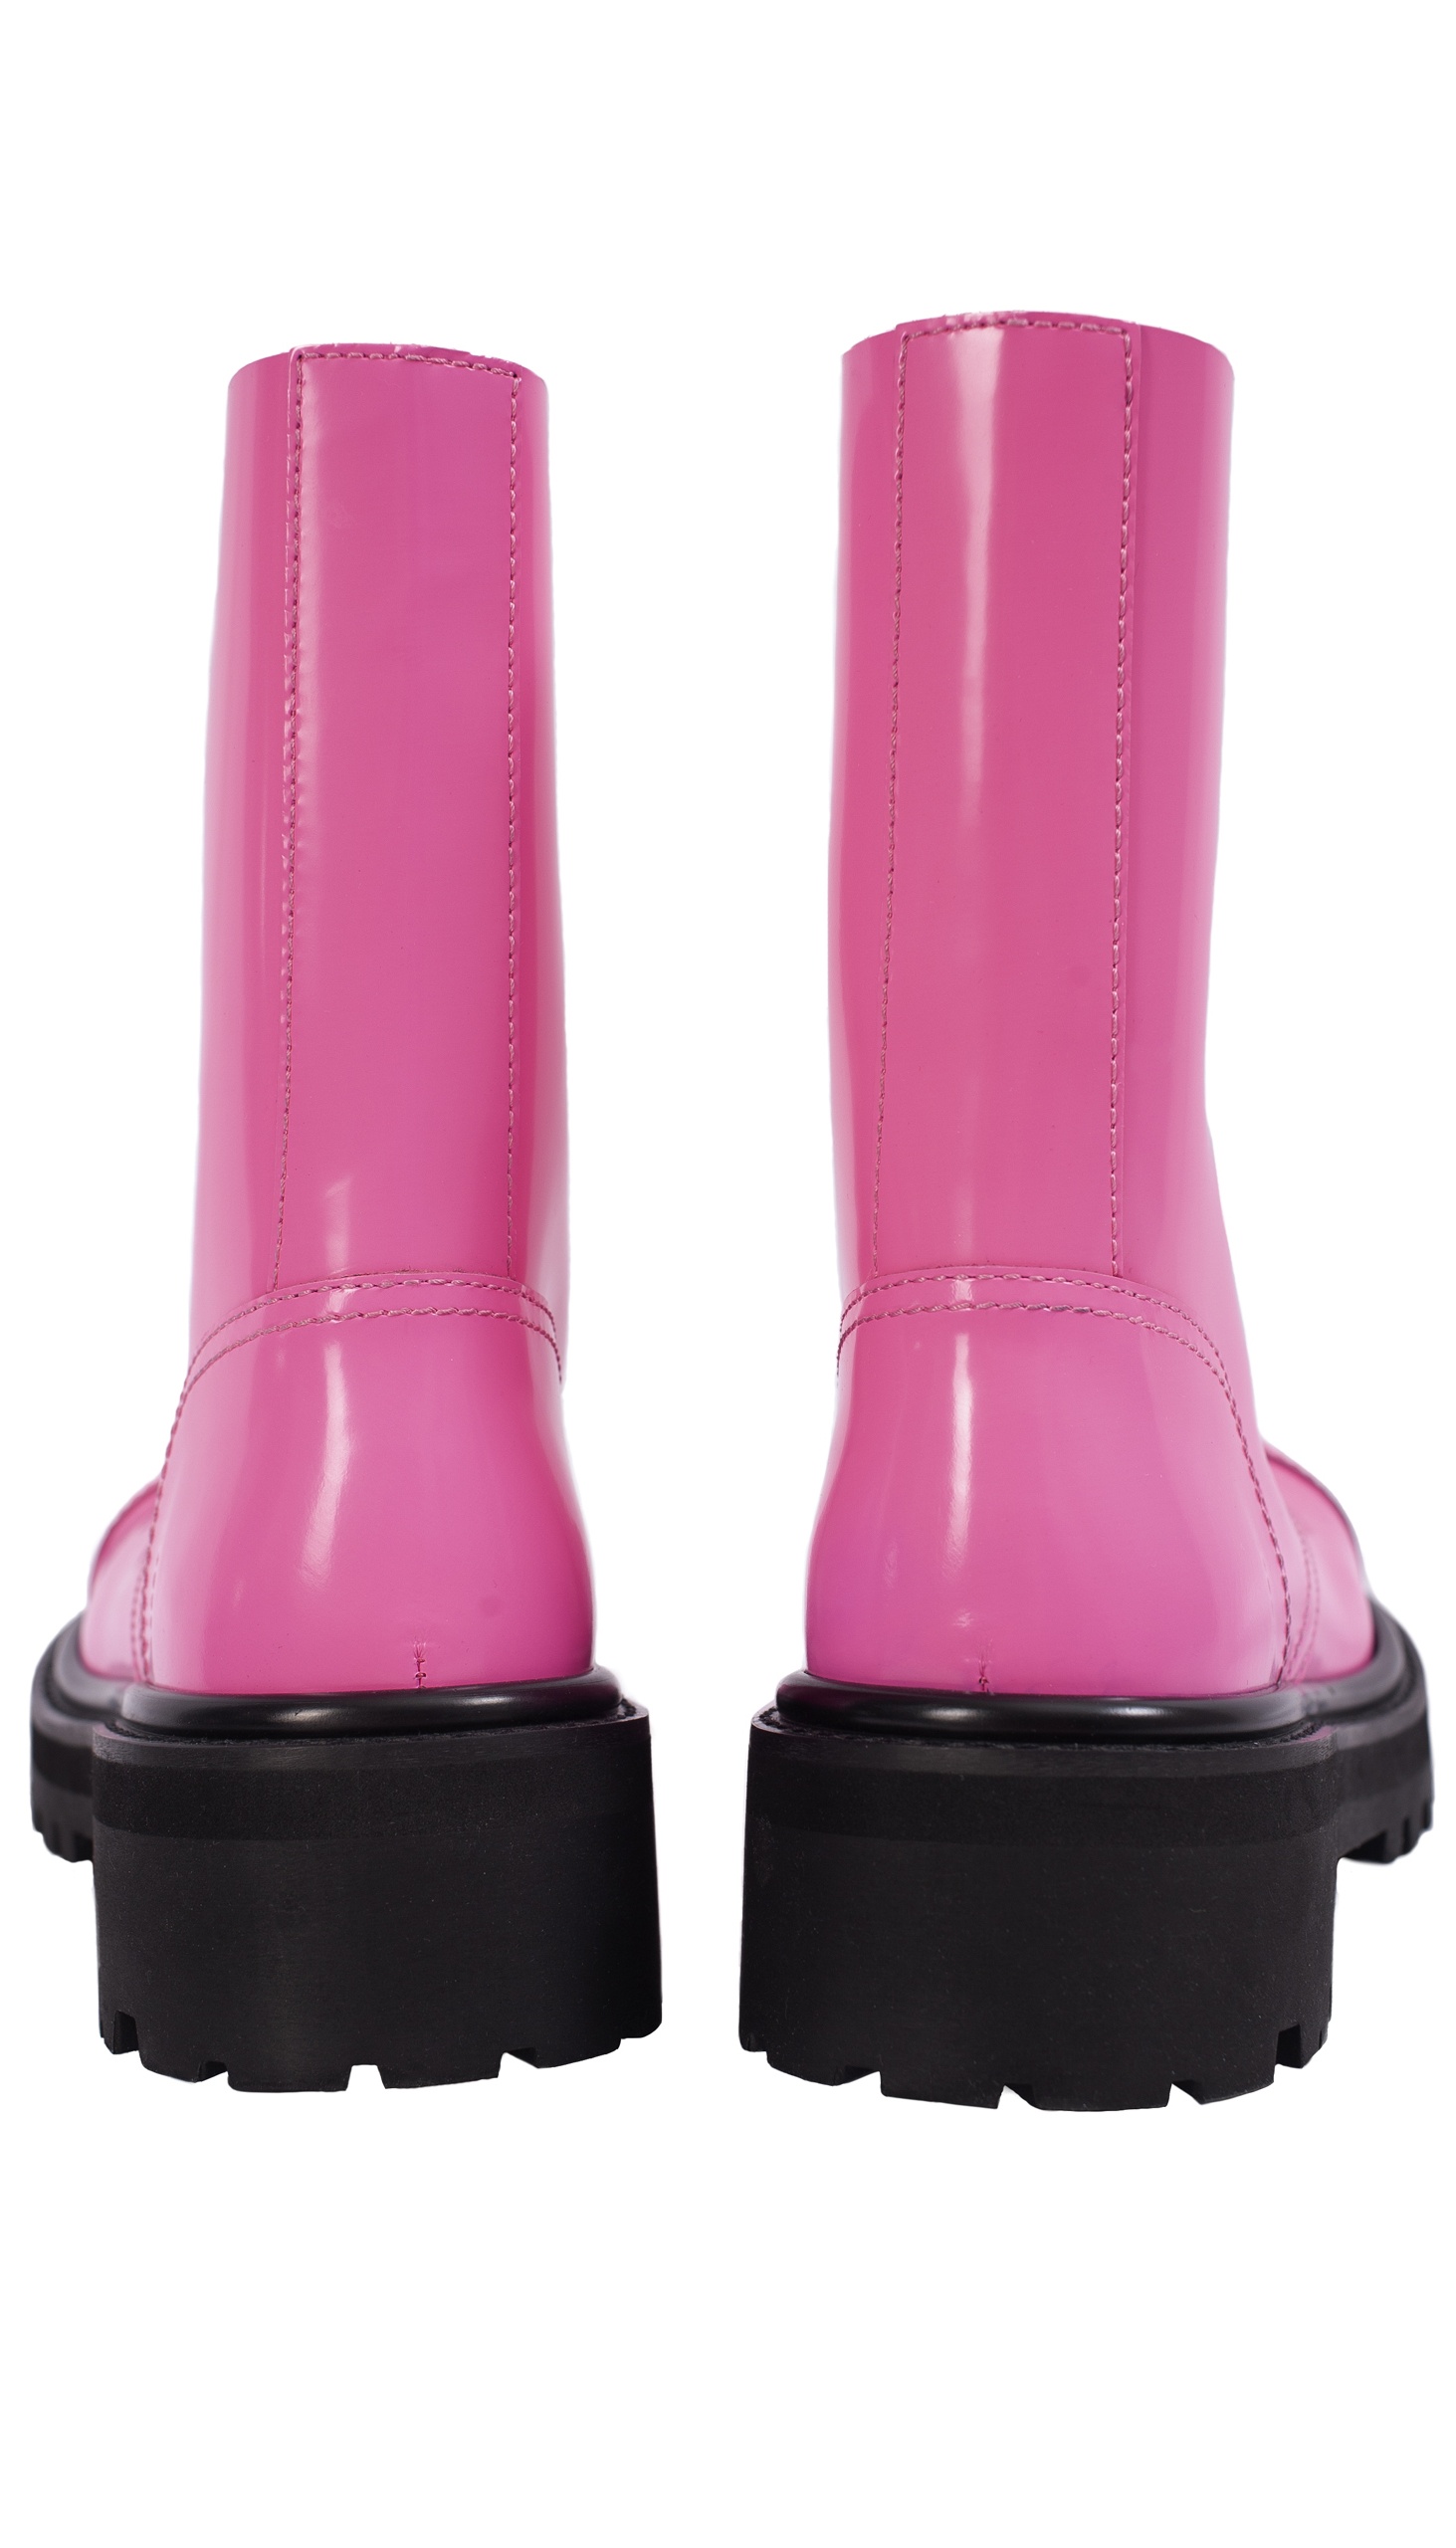 PINK LEATHER BOOTS - 2